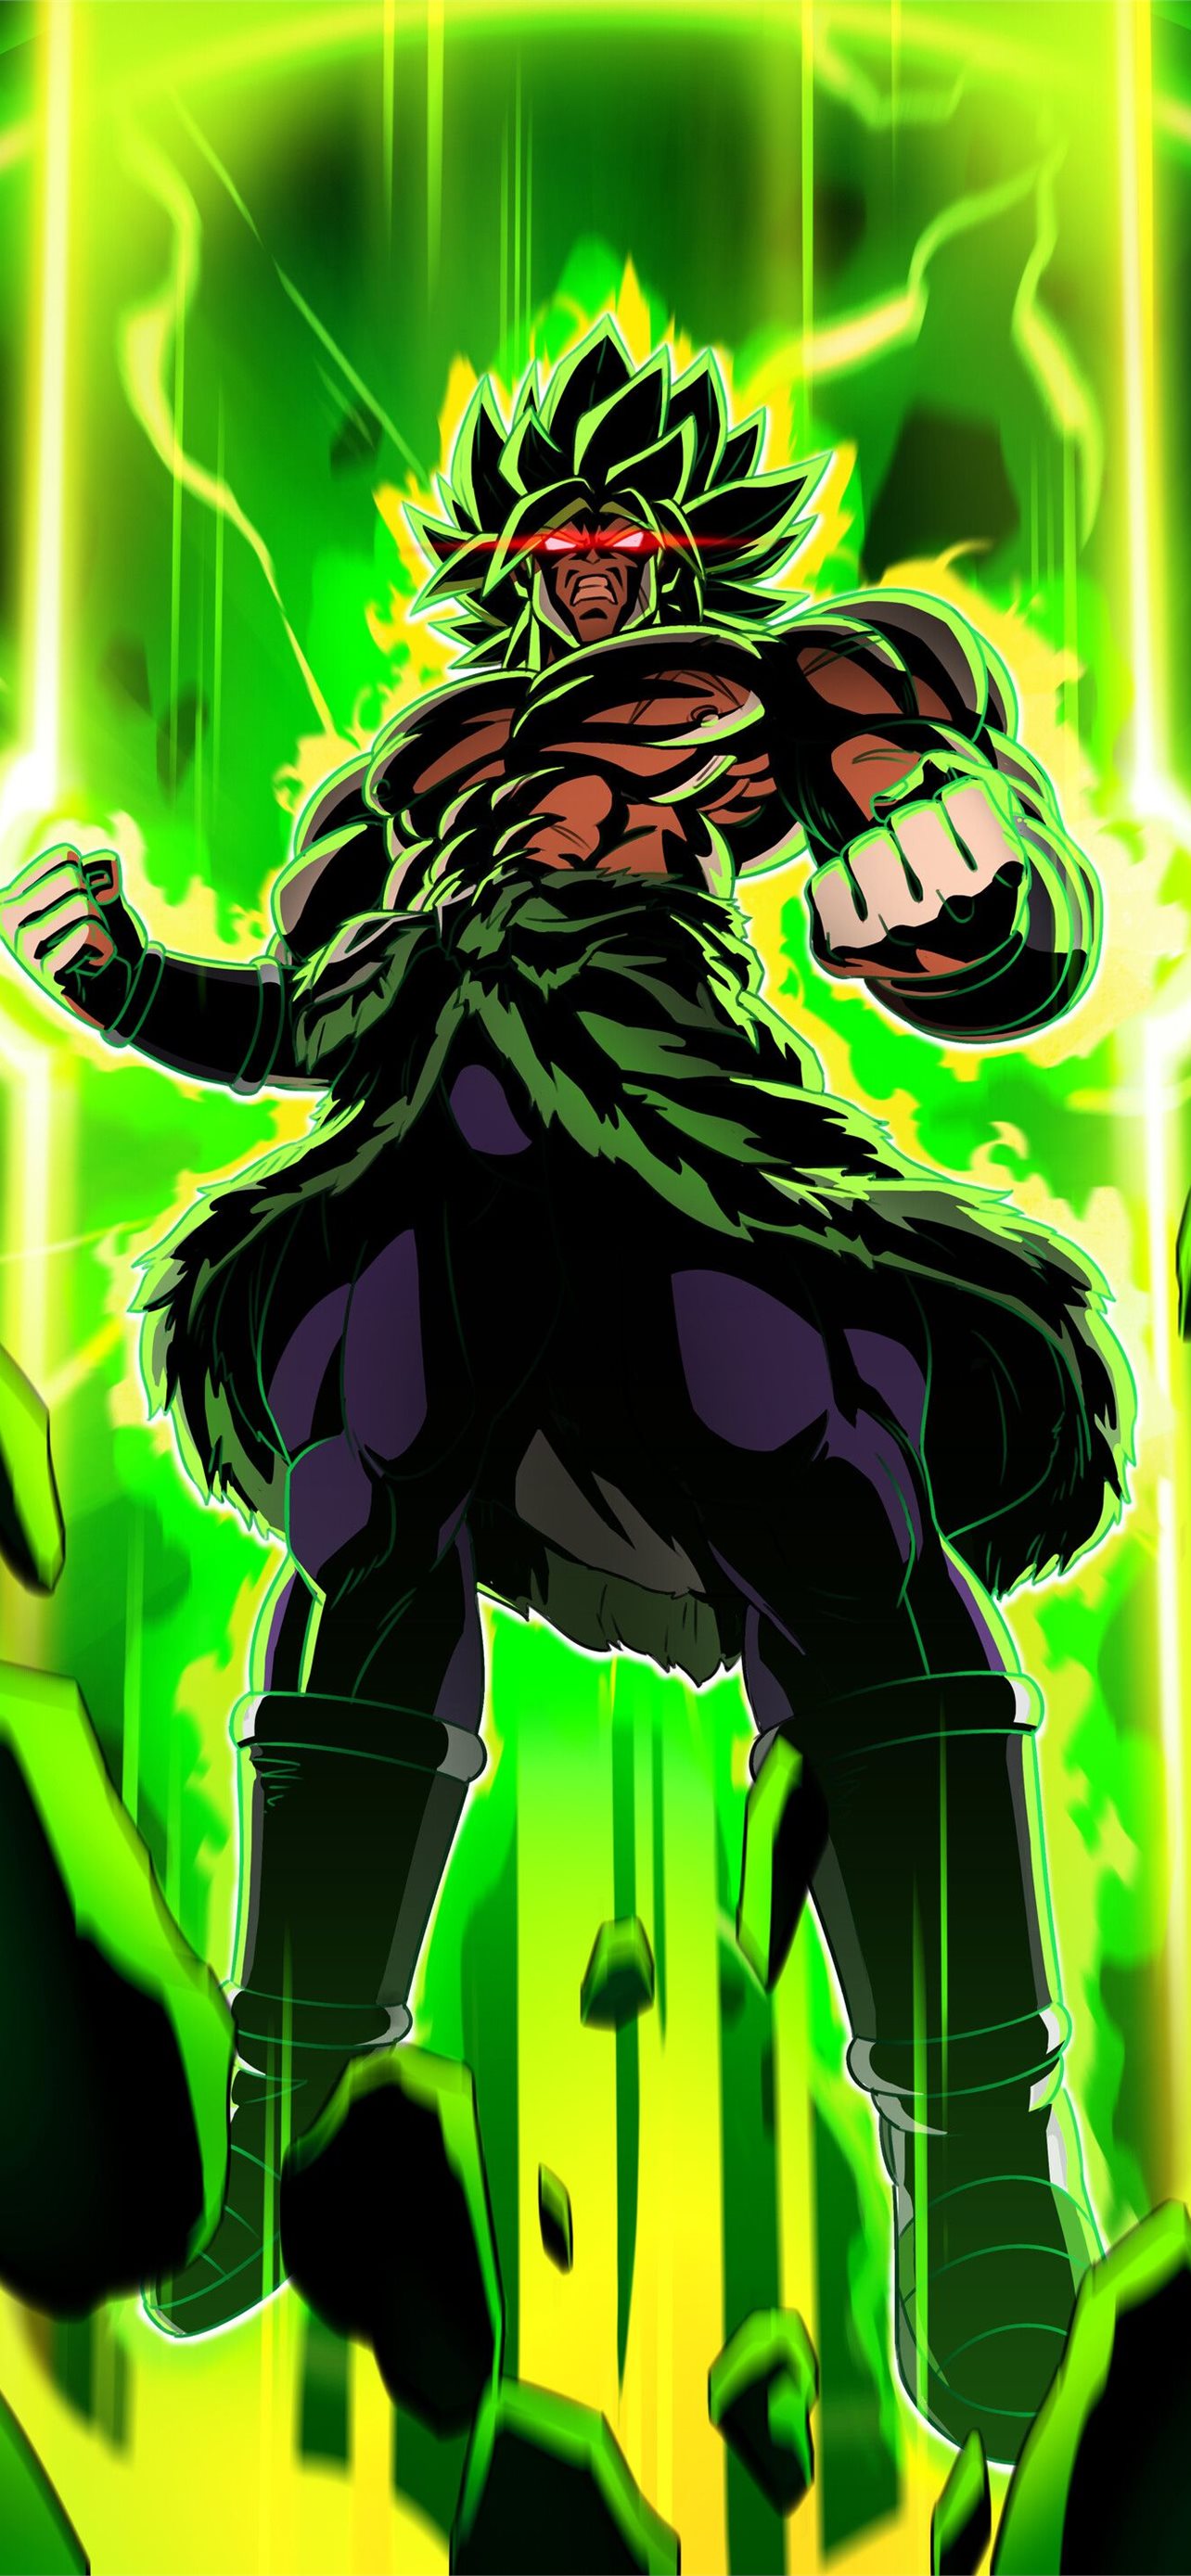 ULTRA Broly wallpaper DBLEGENDS by FusionGxD on DeviantArt